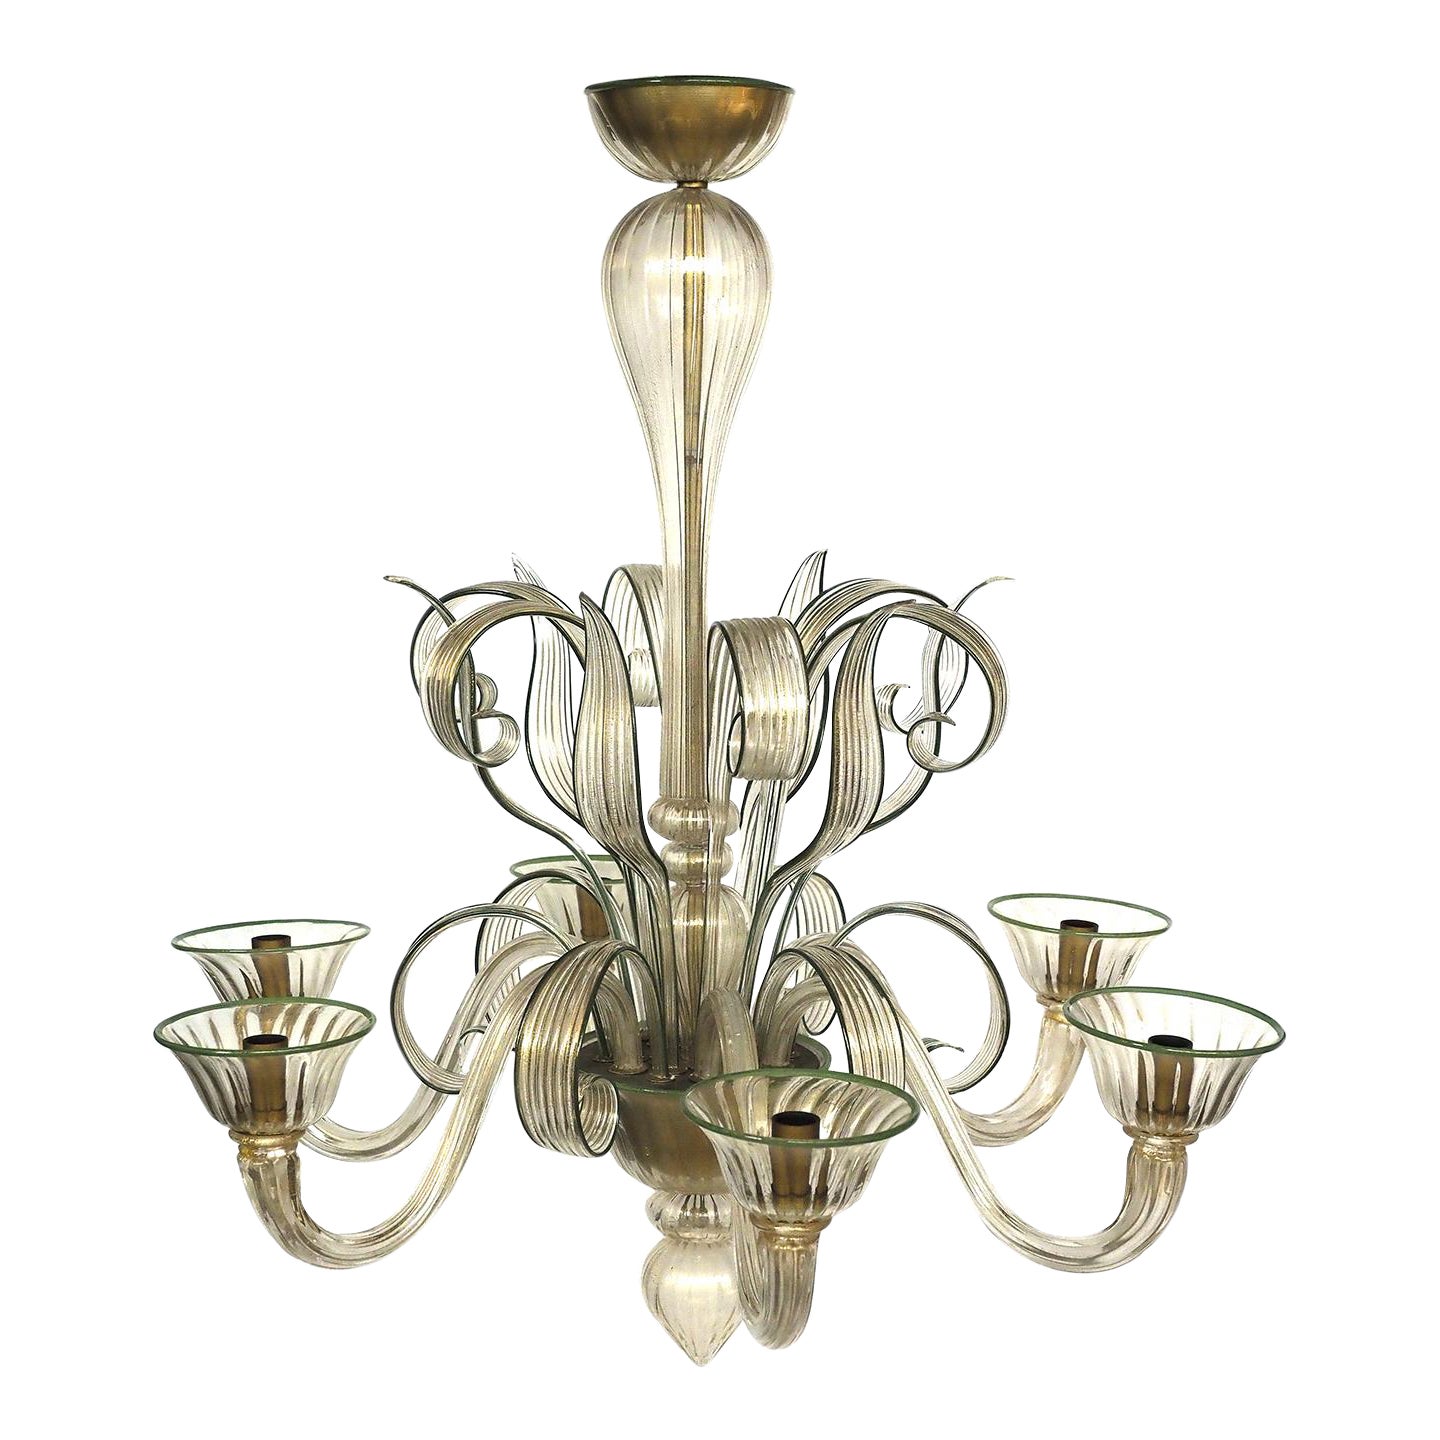 Six-Branch Gold-and-green-colored Crystal Chandelier by Galliano Ferrero